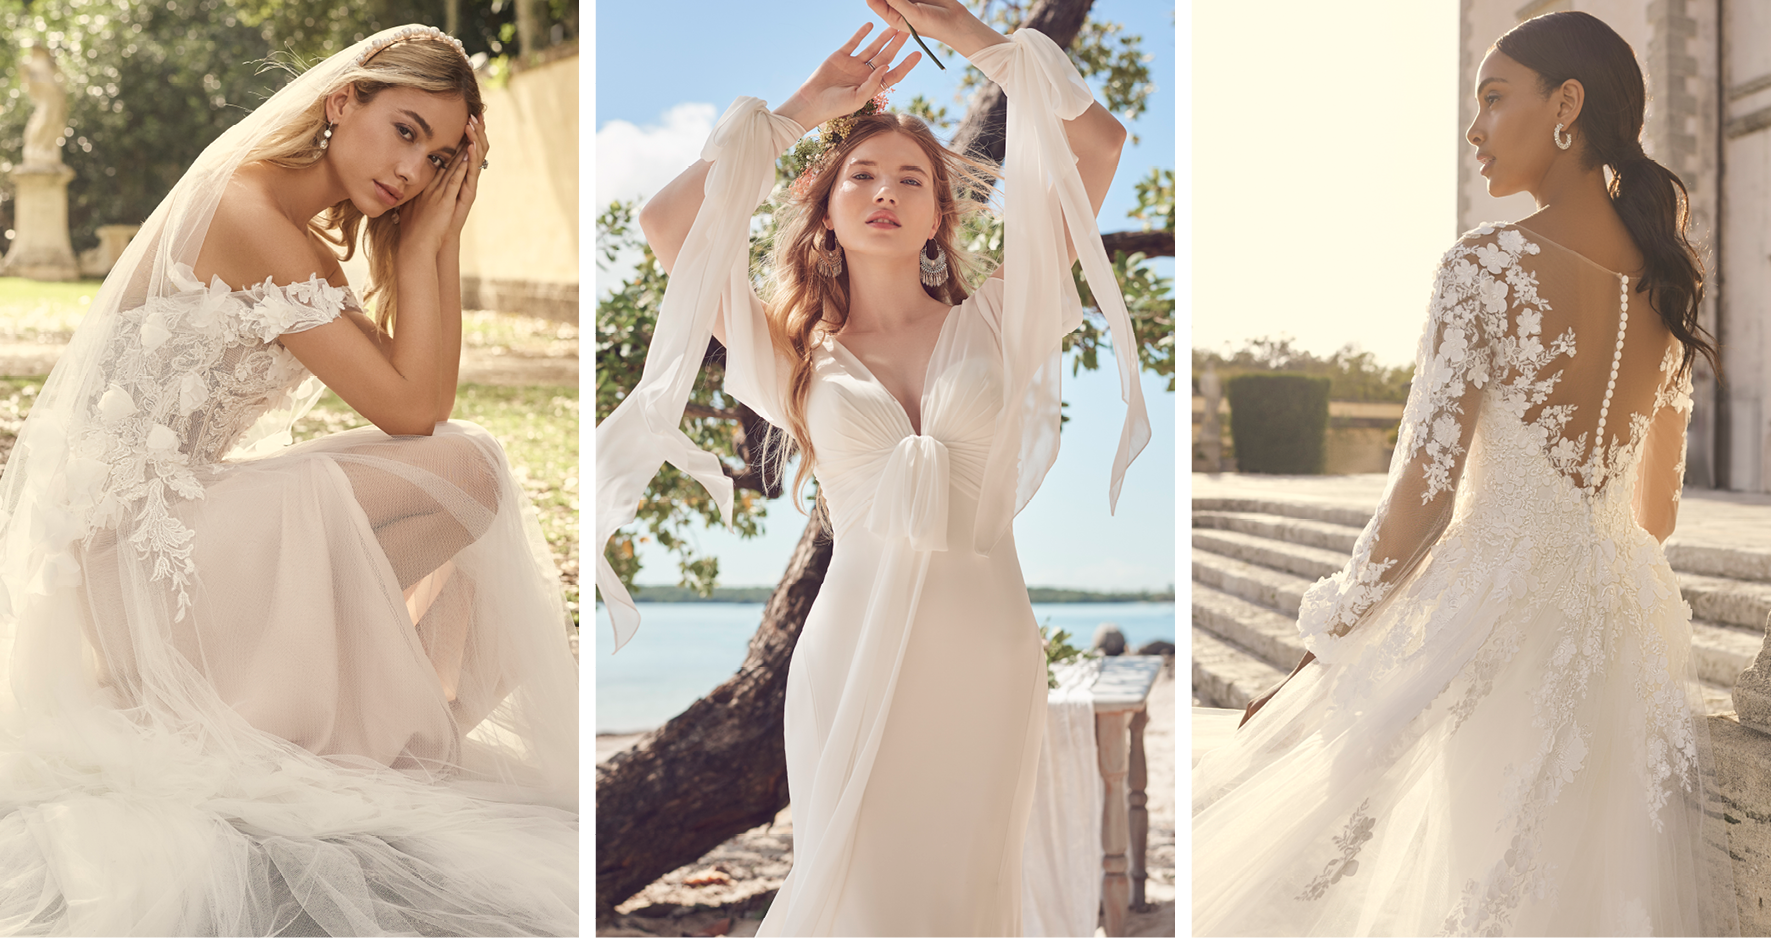 Collage of Brides Wearing International Wedding Dress Trends by Maggie Sottero for Fall 2021